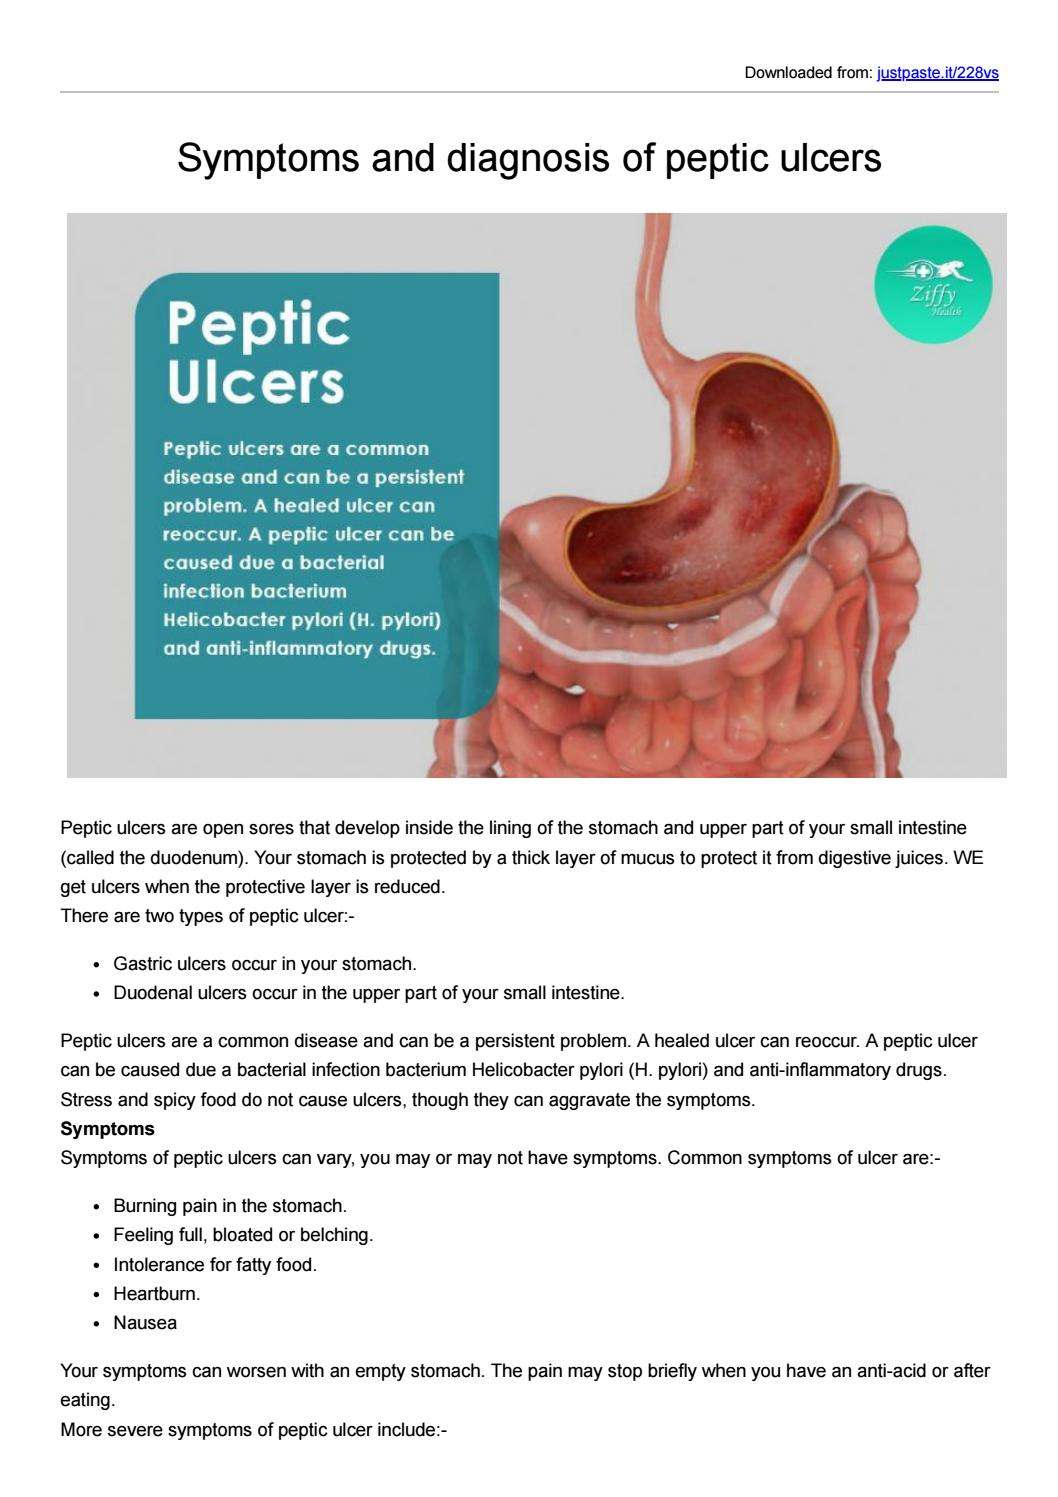 Symptoms and diagnosis of peptic ulcers by Vivek Waghmare ...